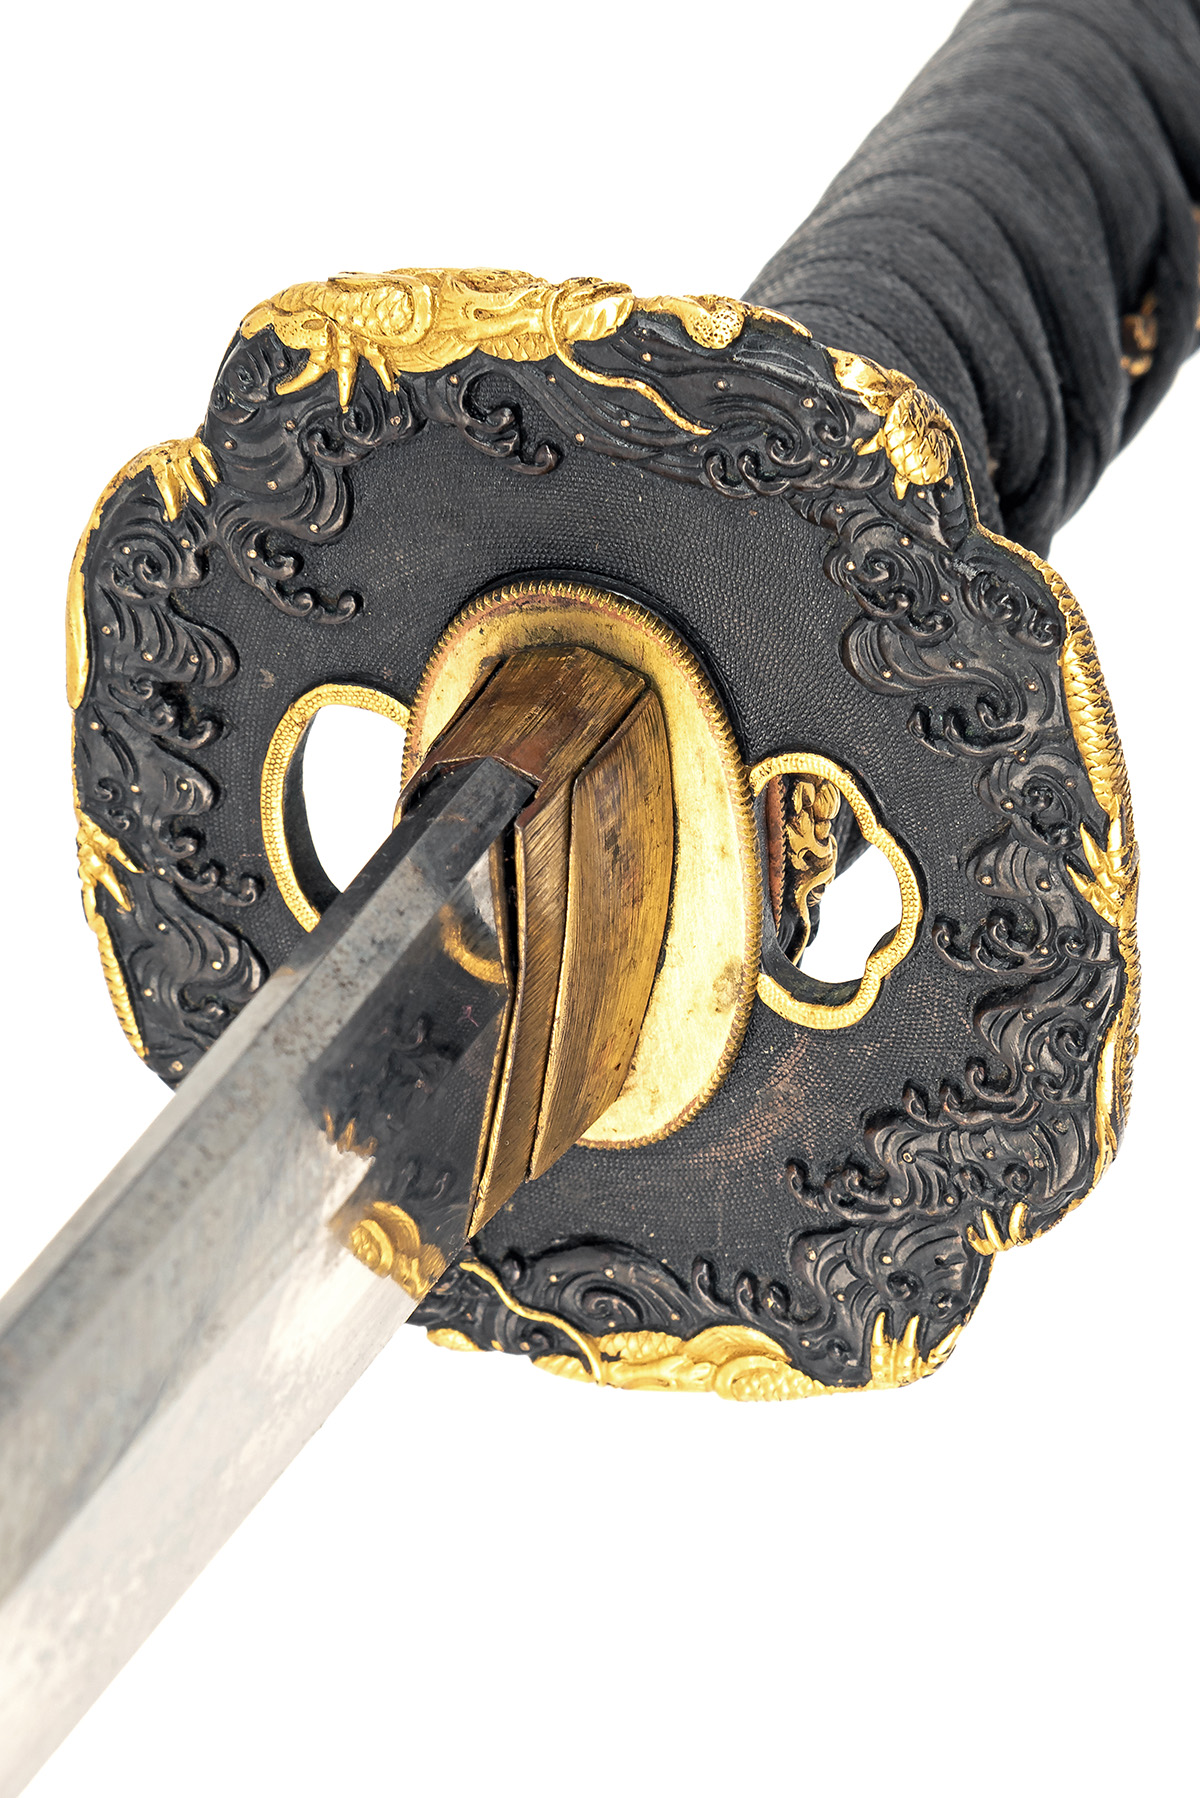 A JAPANESE KATANA WITH SIGNED BLADE, mid 19th century, with curved 28in. blade (some thin staining), - Image 5 of 7